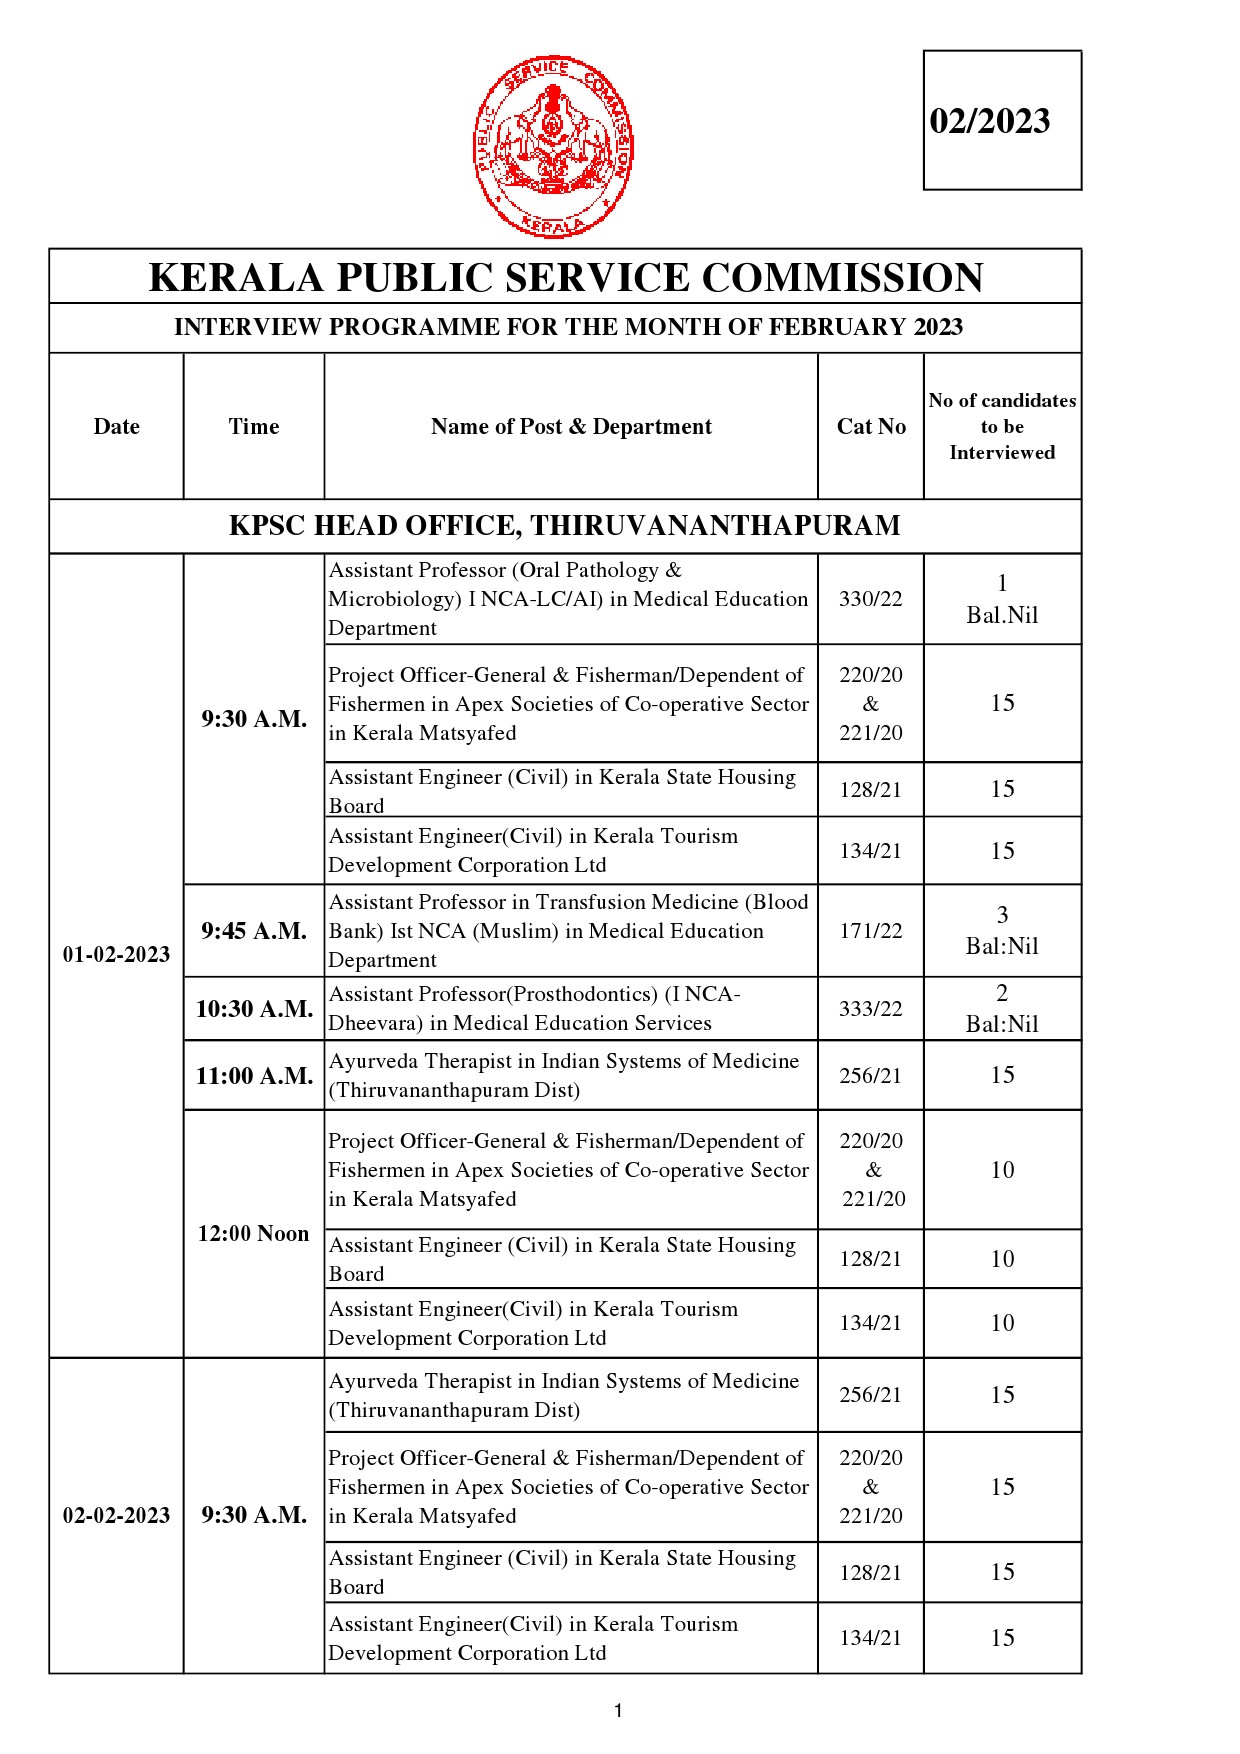 KPSC Interview Programme For The Month Of February 2023 - Notification Image 1